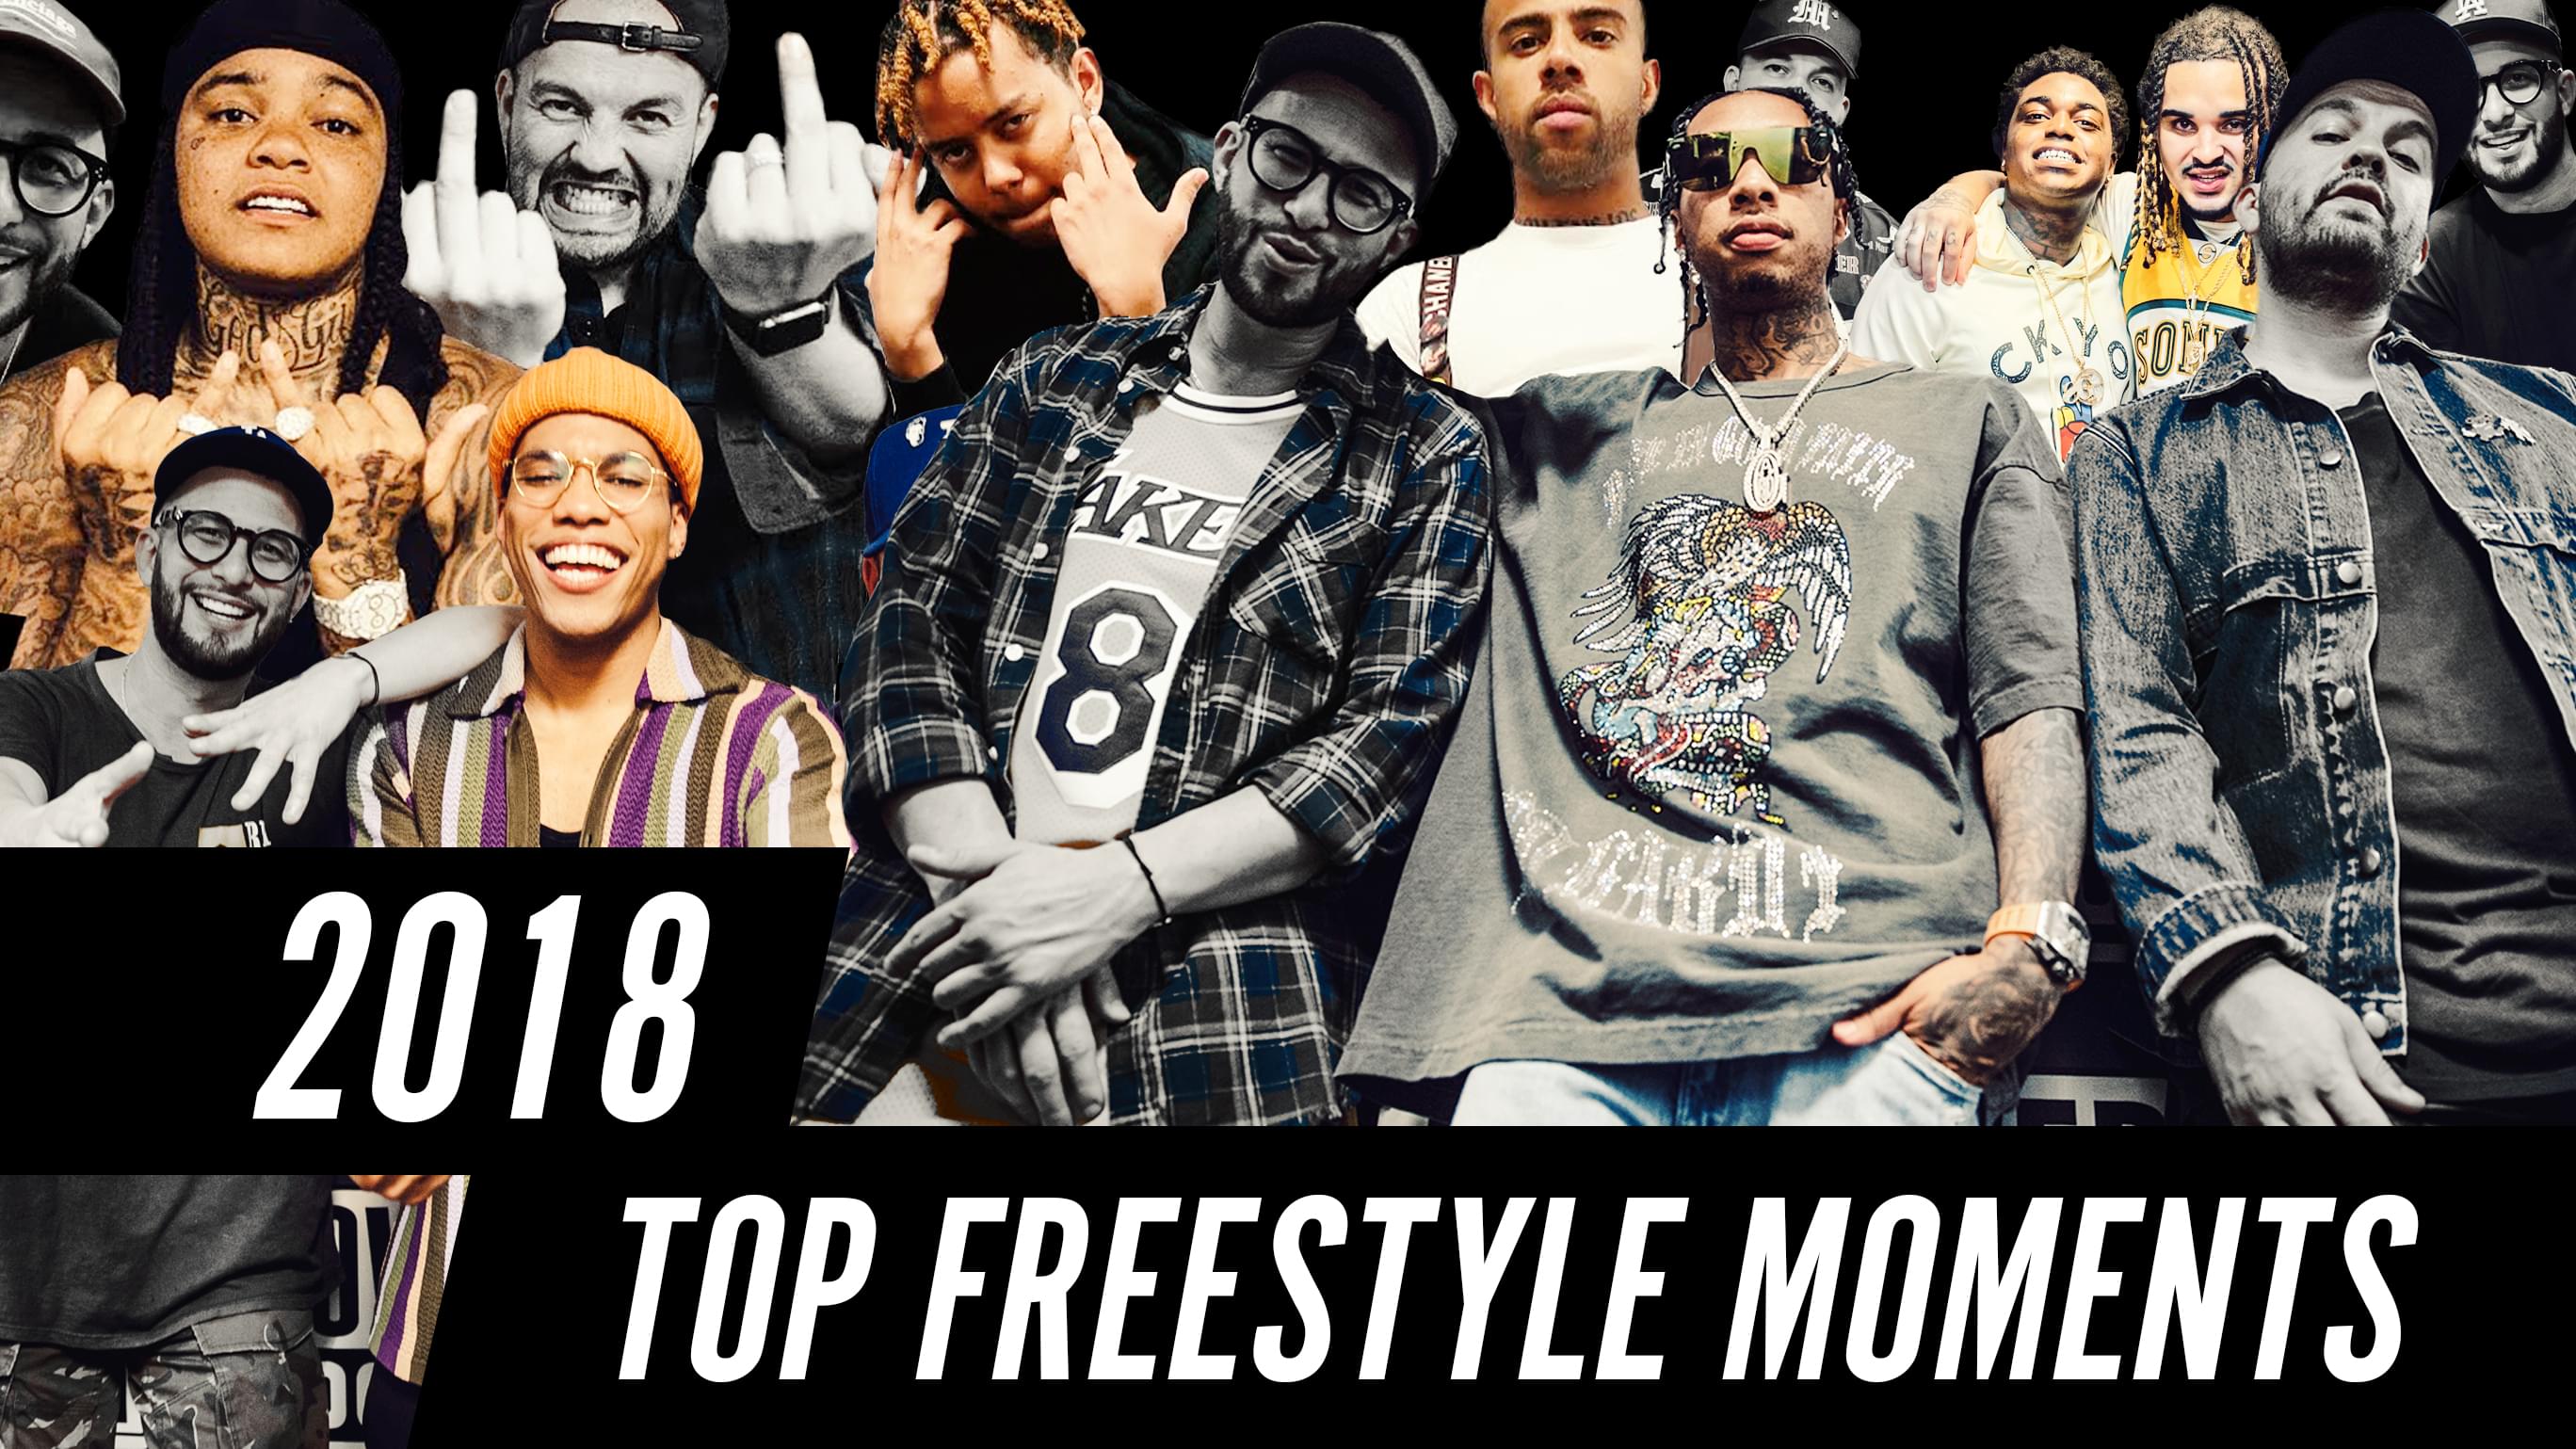 L.A. Leakers Top Freestyle Moments of 2018 Feat. Young M.A, Belly, Tyga + MORE